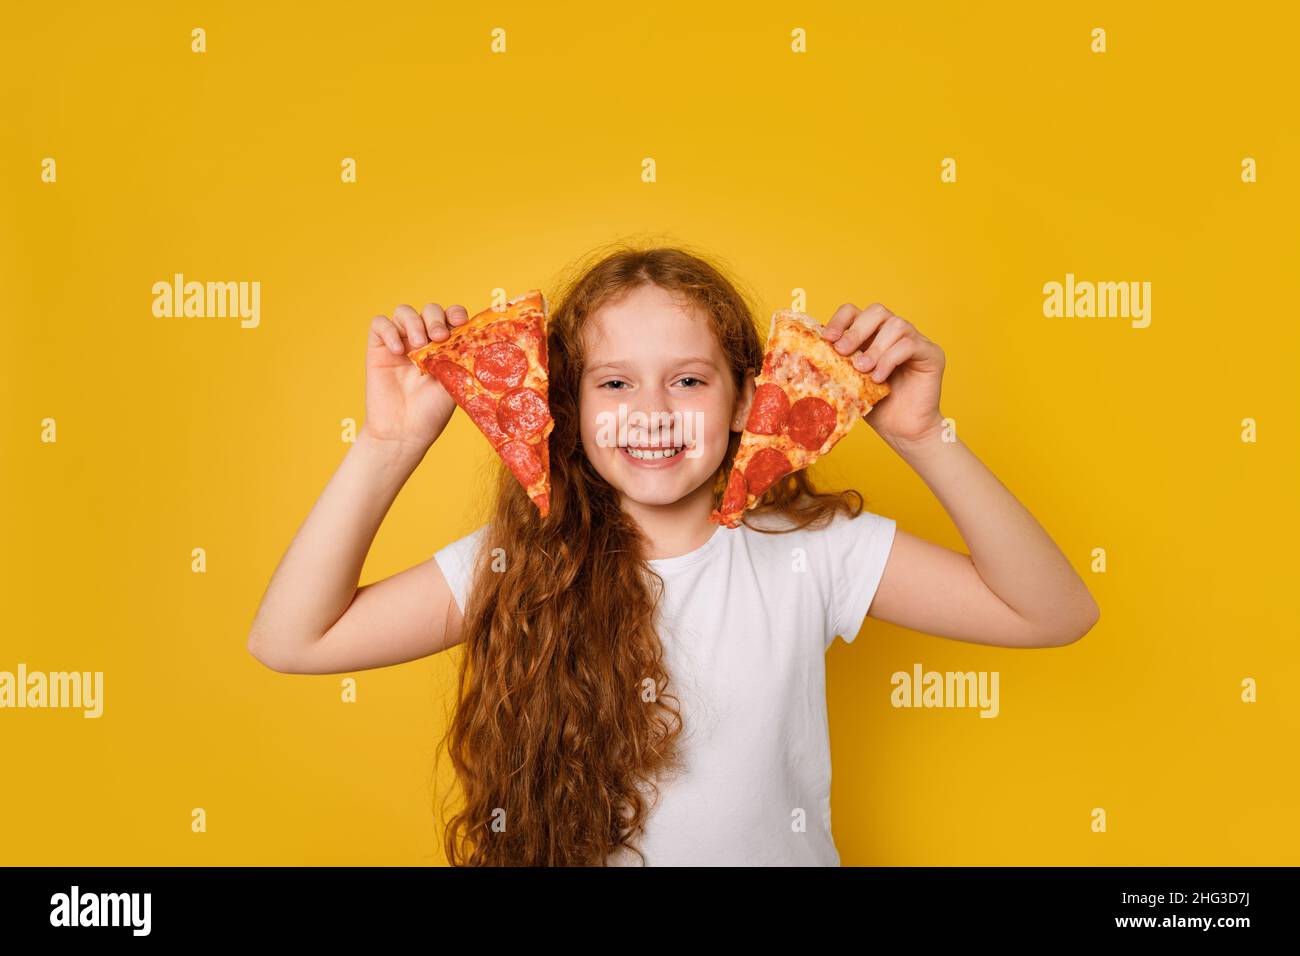 curly girl holds two slices of pizza near her eyes and sticks out her tongue. Stock Photo